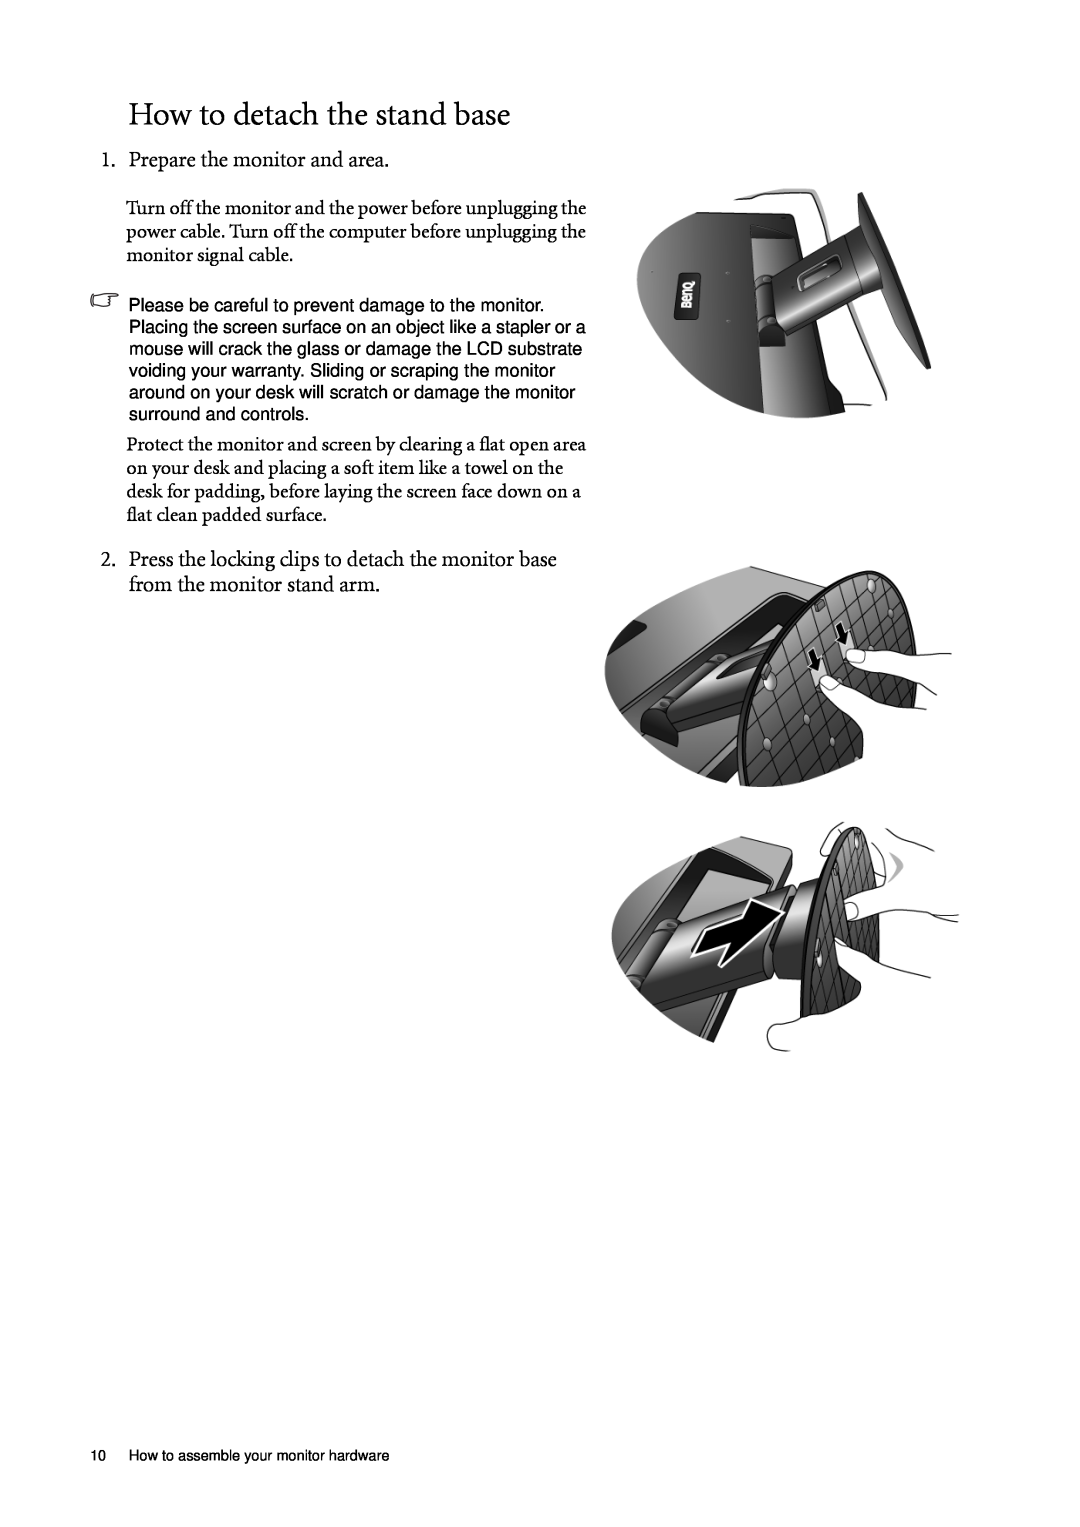 BenQ G920WAL, G920WL user manual How to detach the stand base, Prepare the monitor and area 